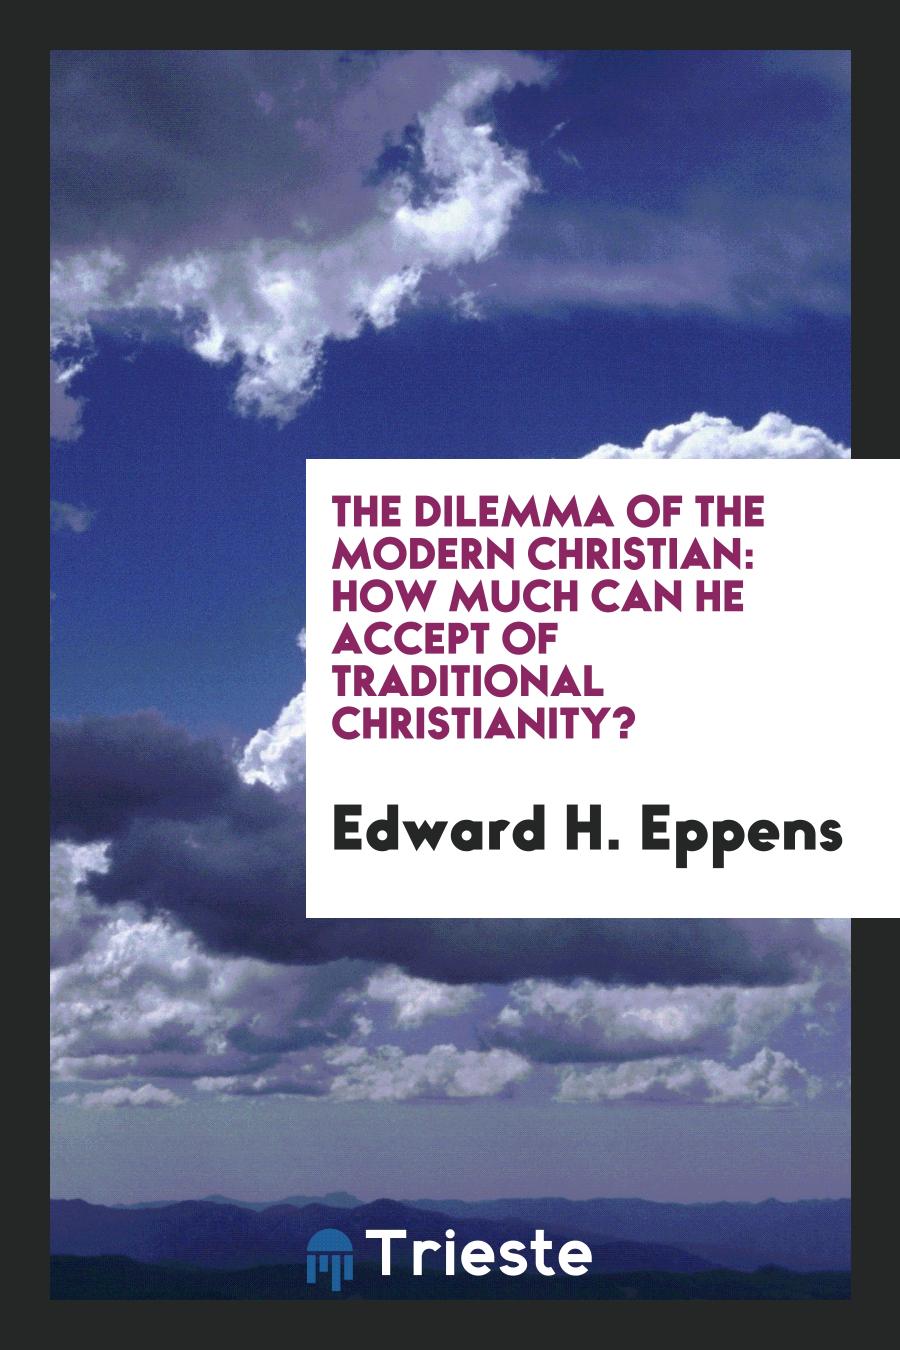 The Dilemma of the Modern Christian: How Much Can He Accept of Traditional Christianity?